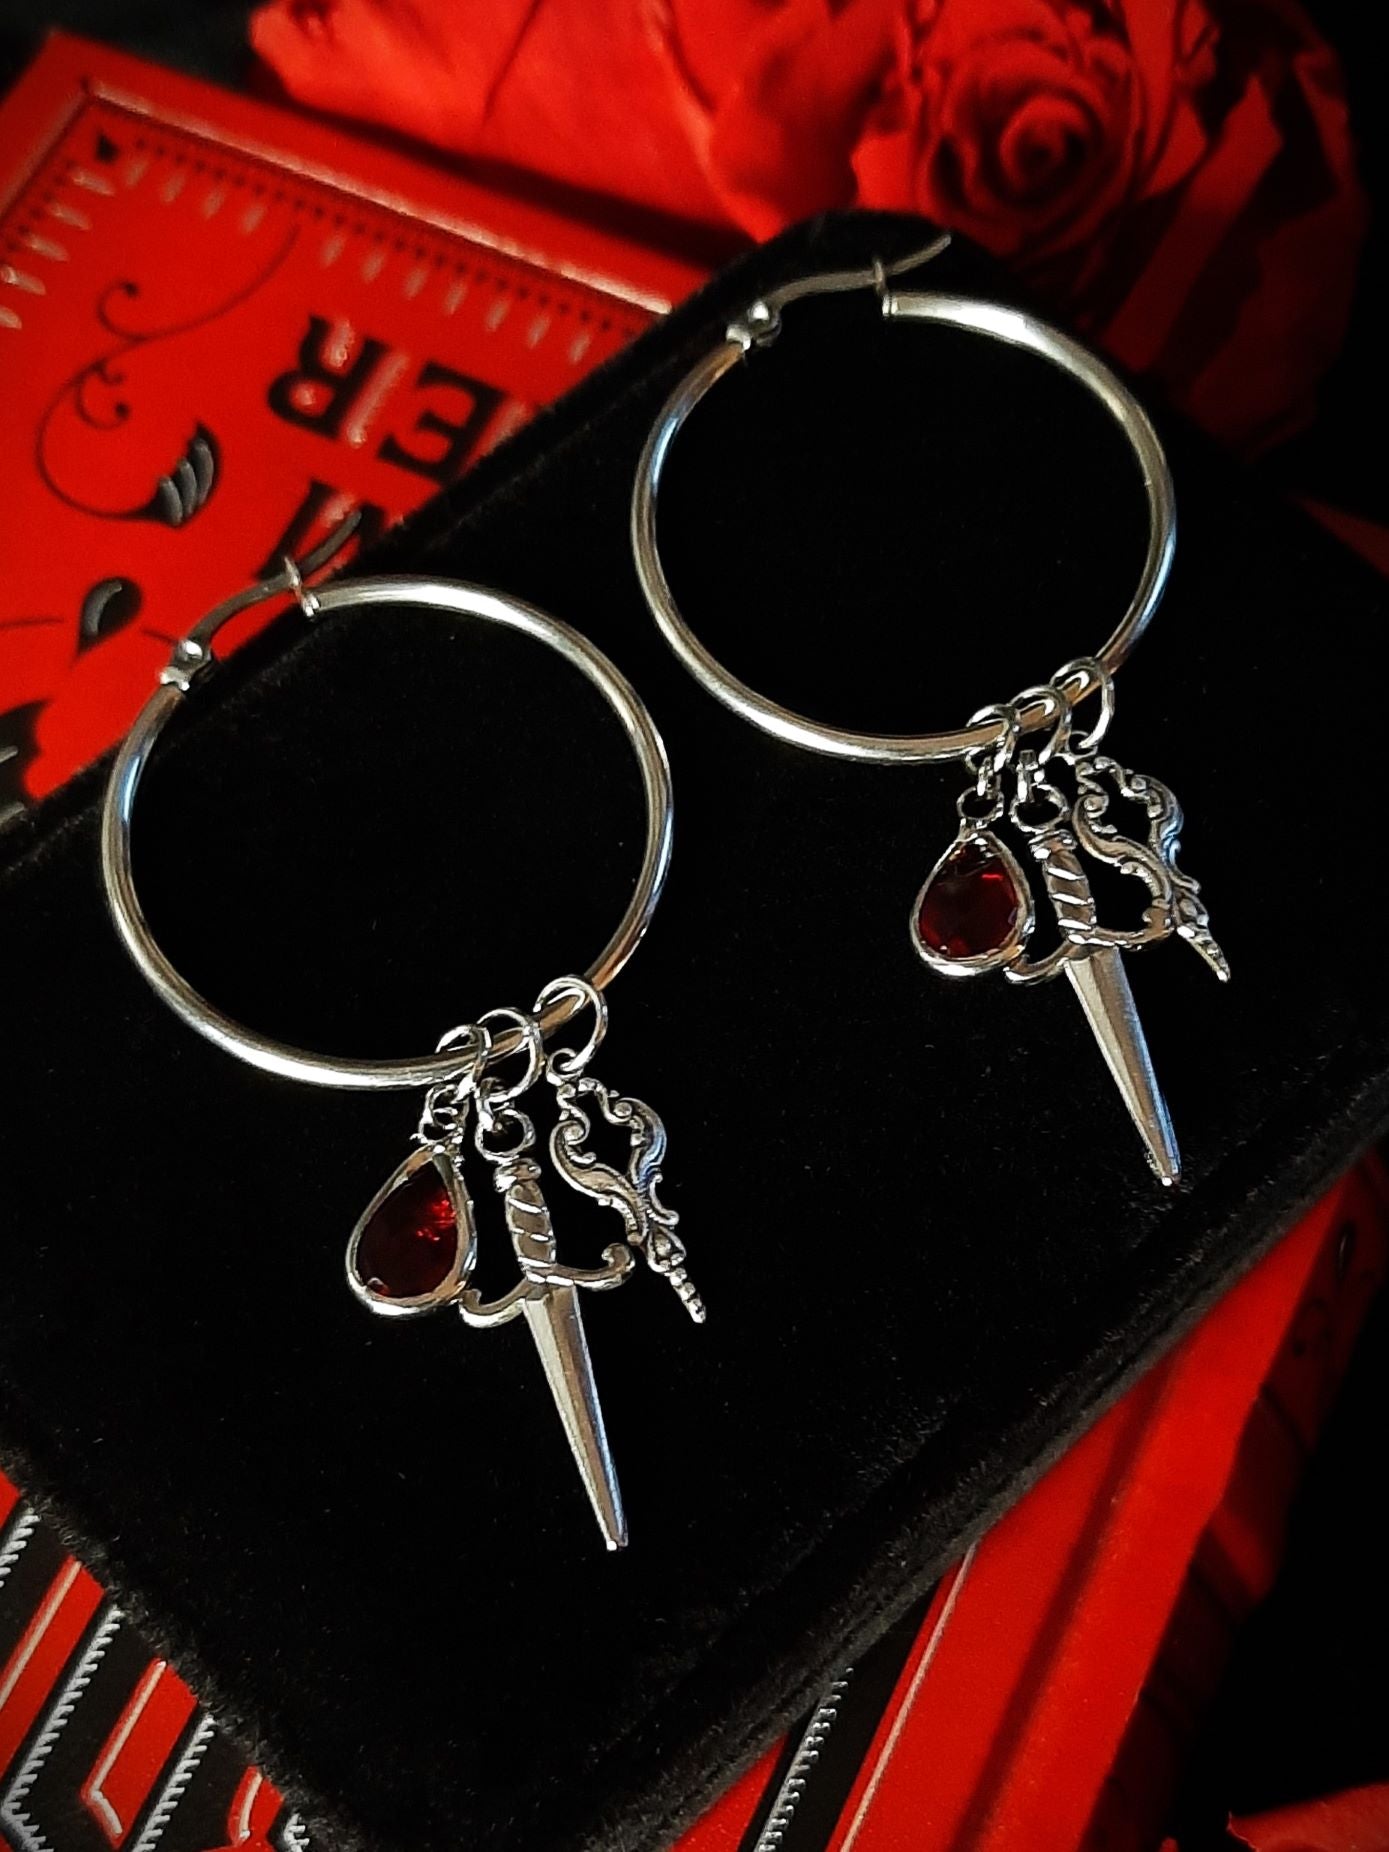 𝕰𝖒𝖕𝖗𝖊𝖘𝖘 charm hoops - Red 𝖔𝖓𝖊 𝖑𝖊𝖋𝖙 !